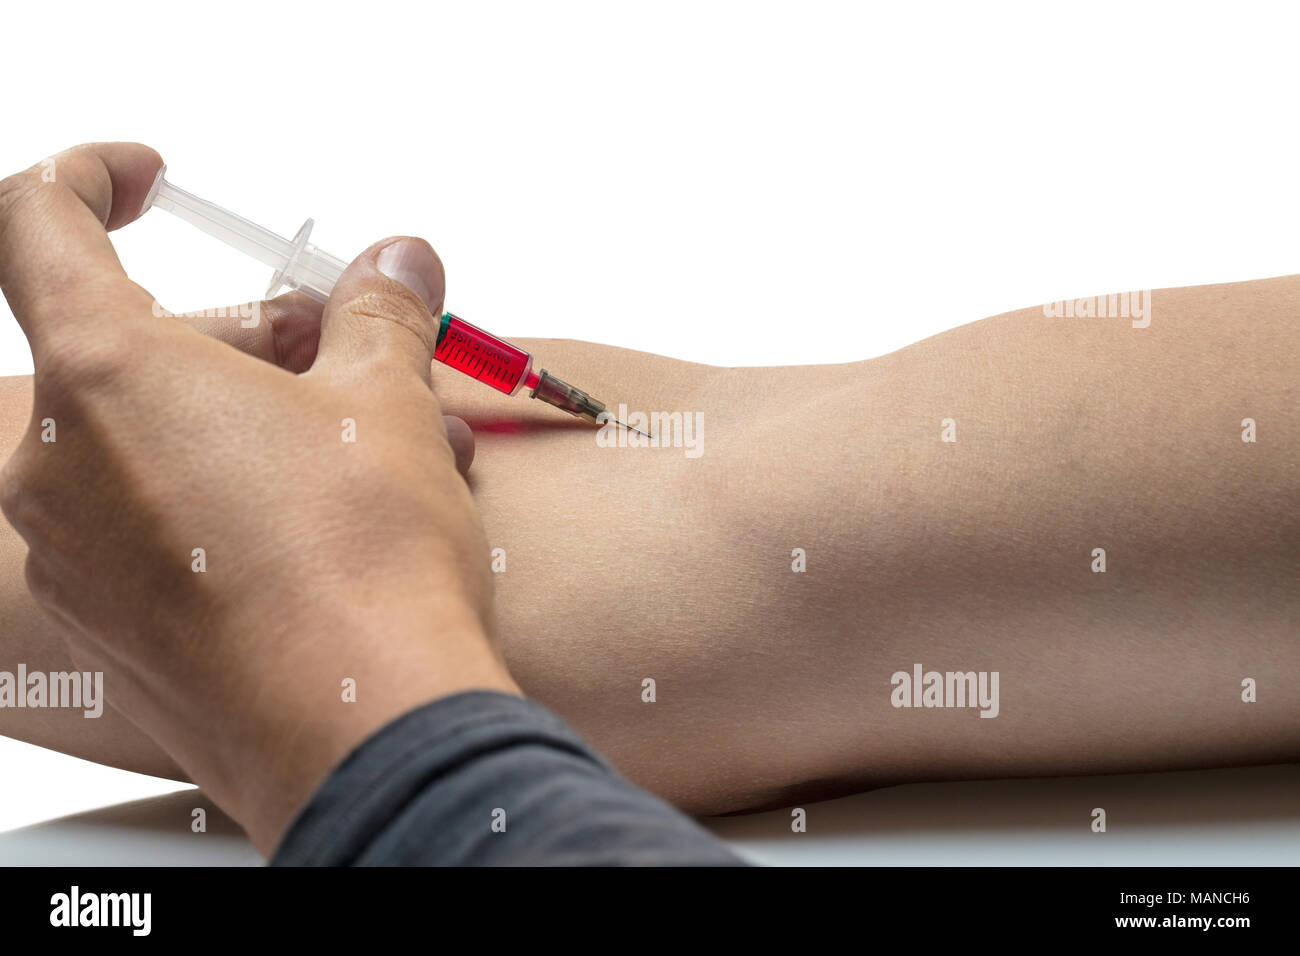 Man inject himself with drug by syringe Stock Photo